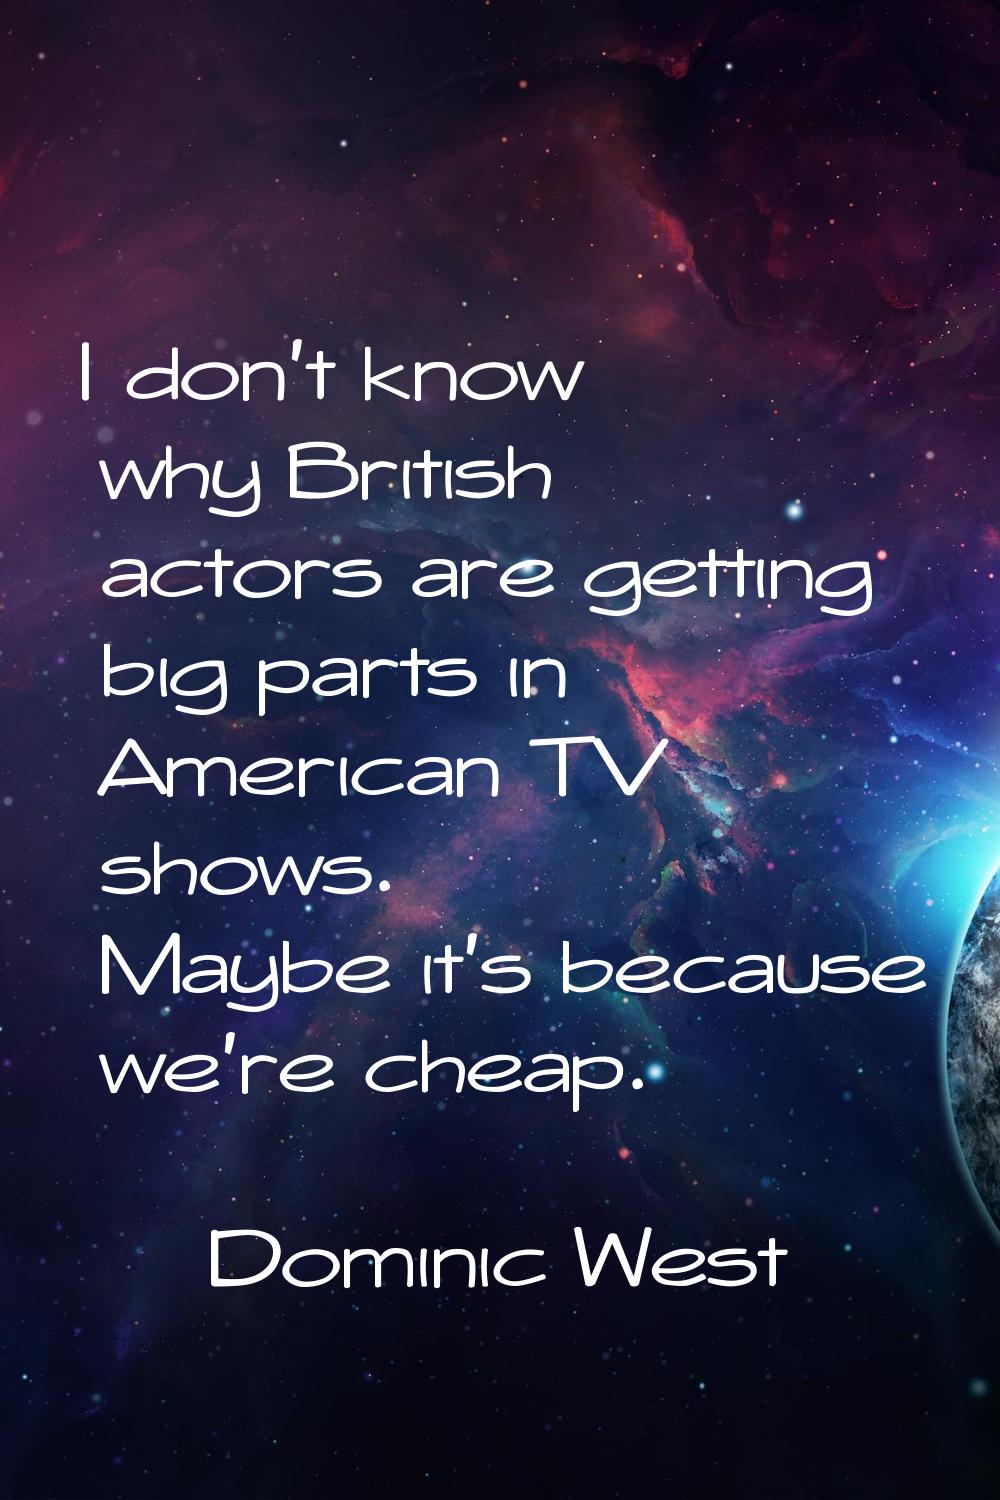 I don't know why British actors are getting big parts in American TV shows. Maybe it's because we'r